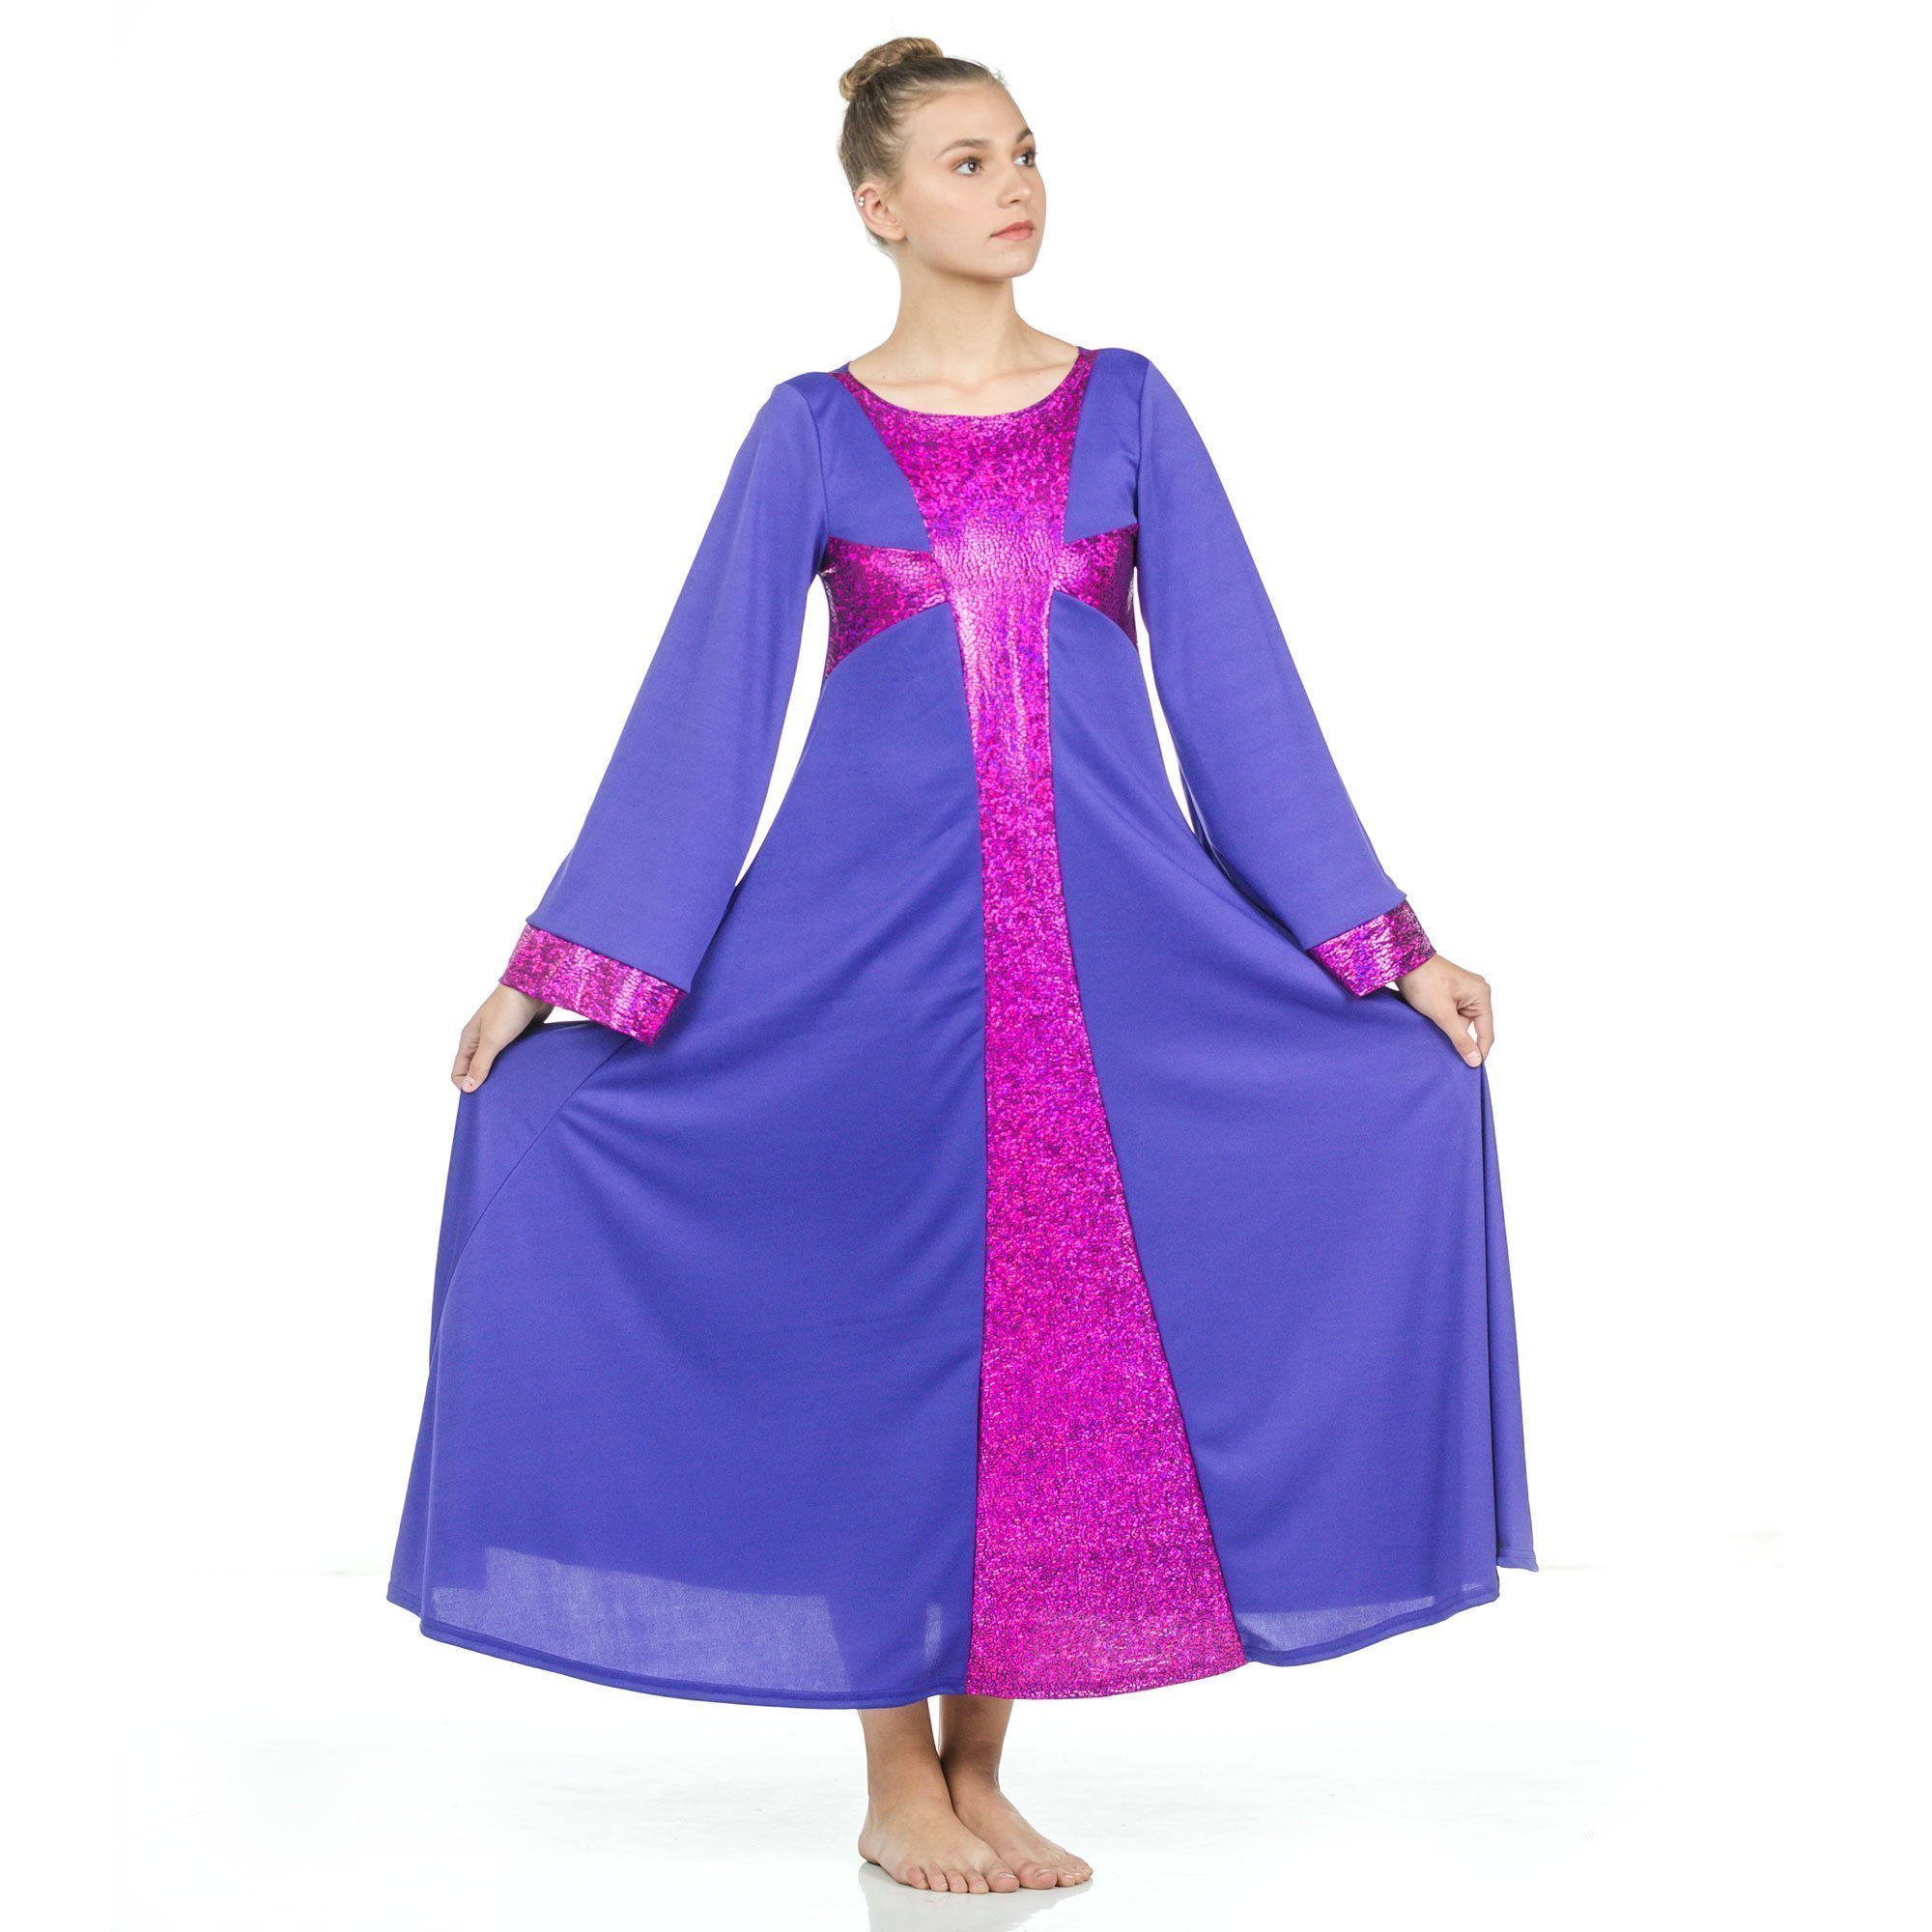 Danzcue Praise Dance Shimmery Cross Long Sleeve Dress - Click Image to Close